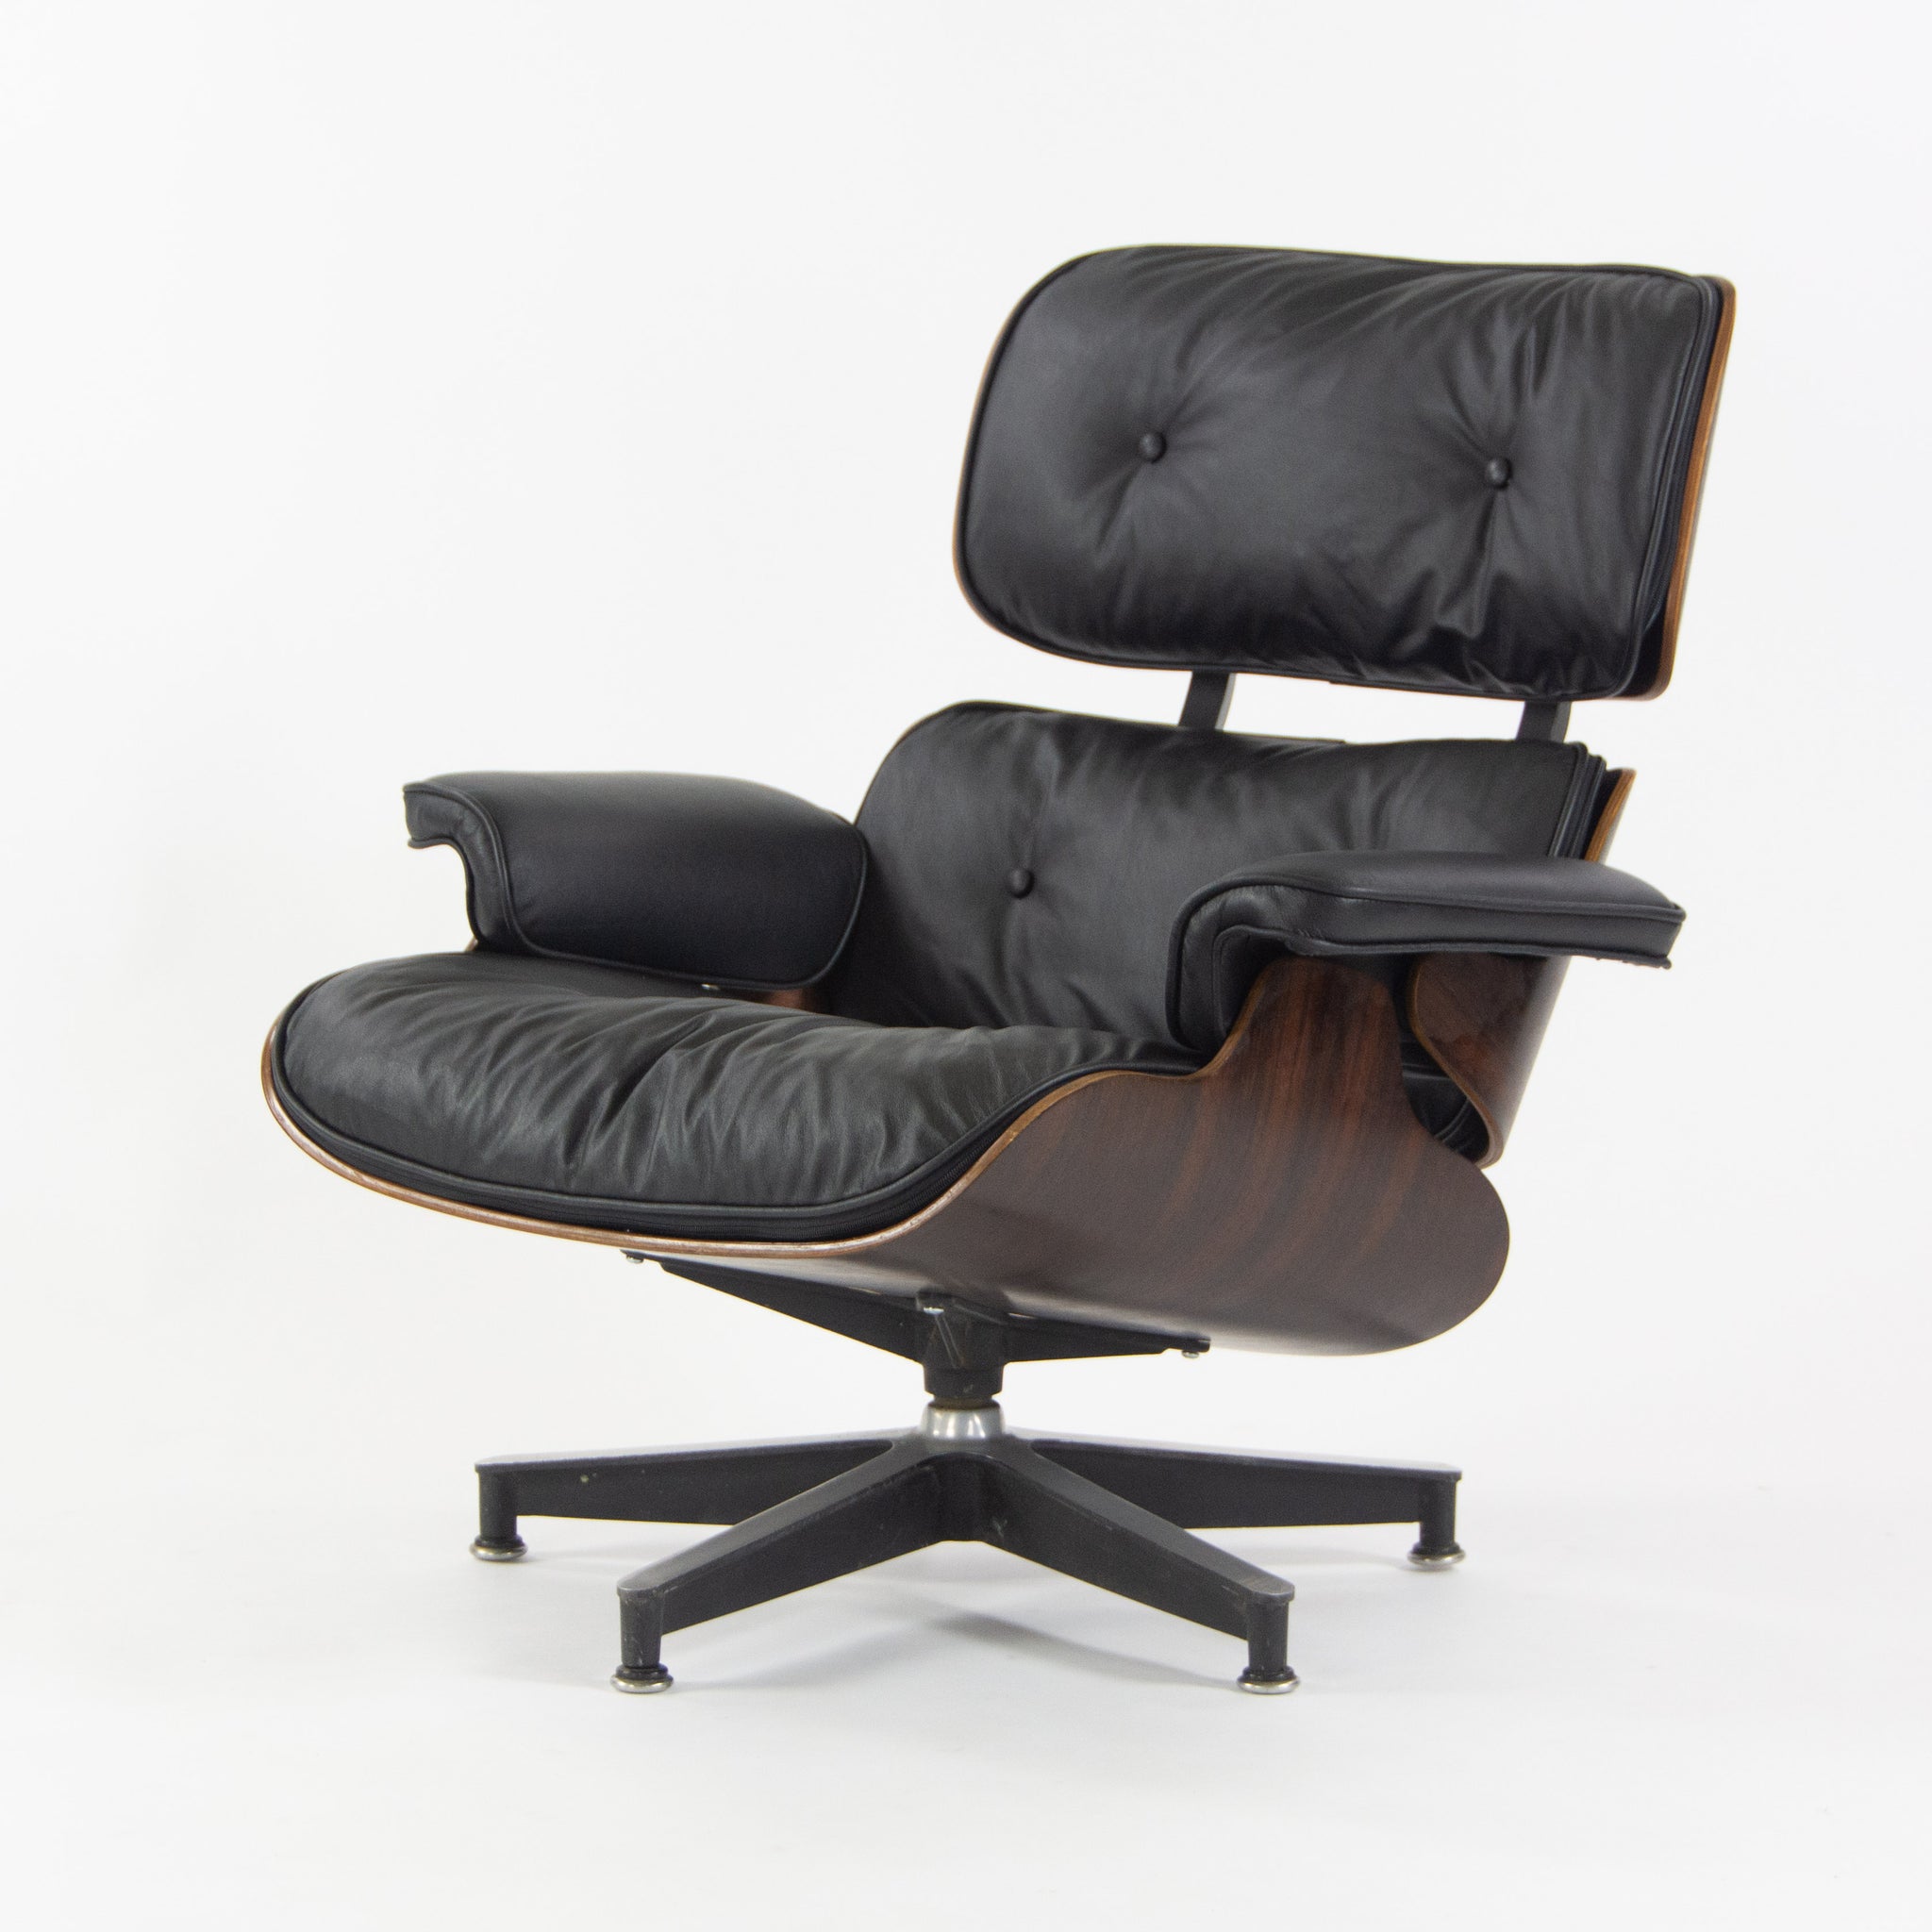 SOLD 1960s Herman Miller Eames Lounge Chair and Ottoman Rosewood 670 671 New Cushions